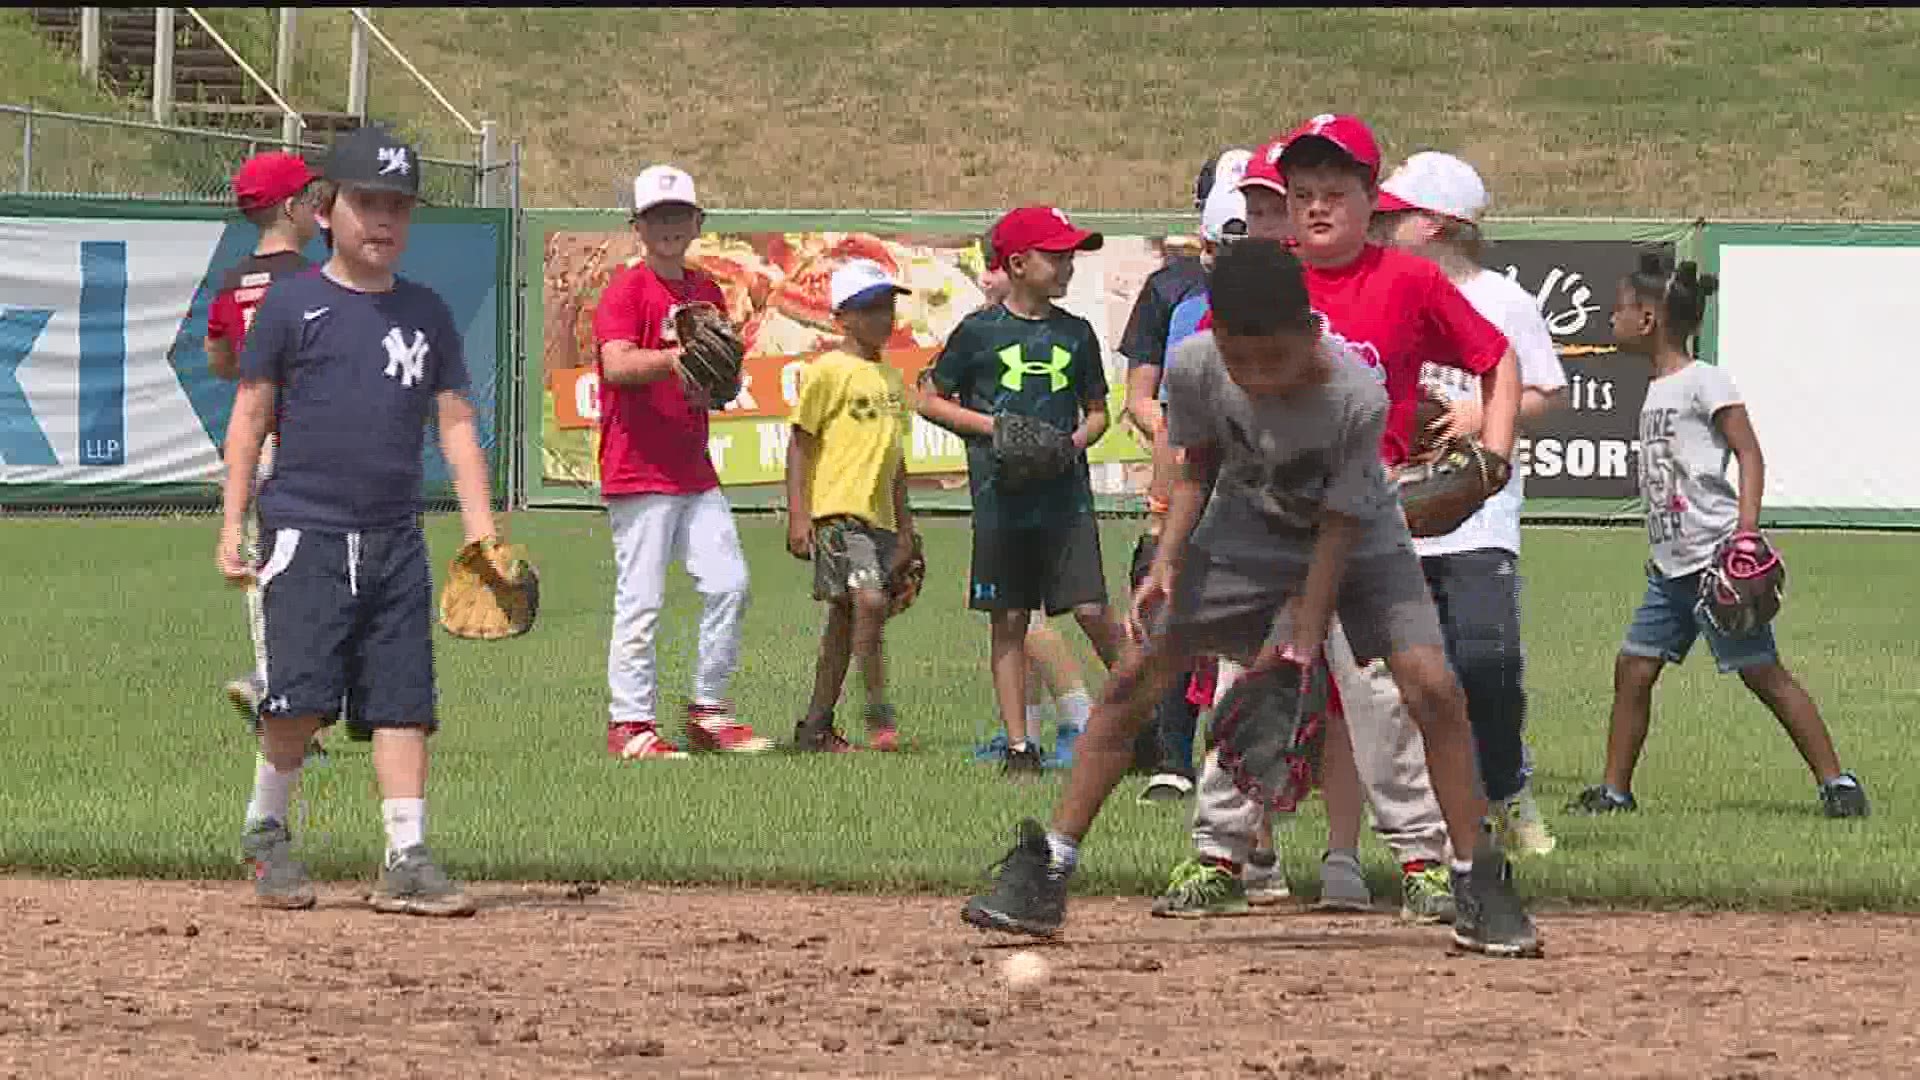 Campers grateful for opportunity to learn new skills